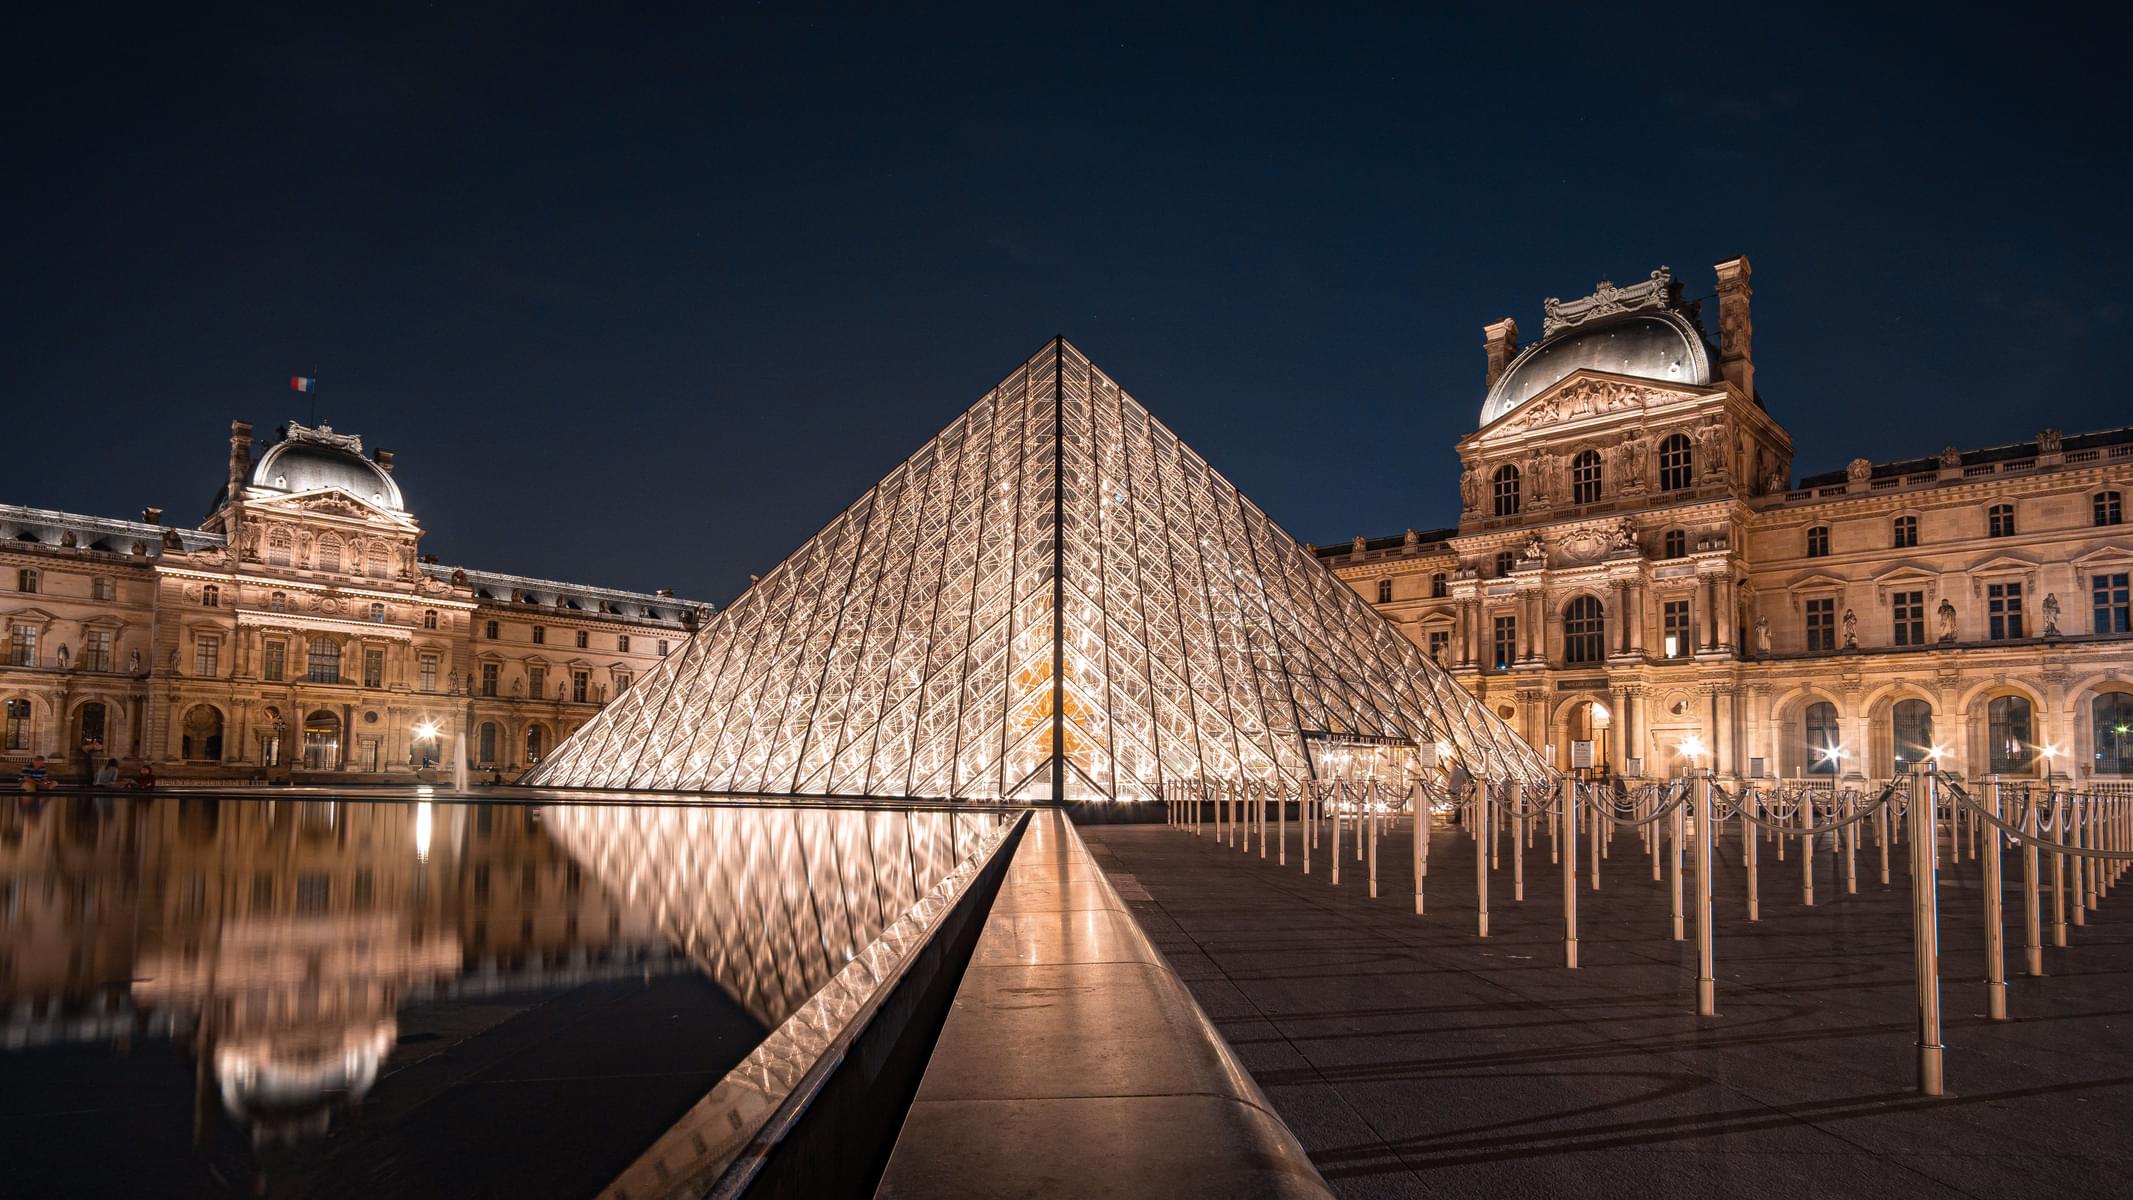 The architecture of Louvre Palace